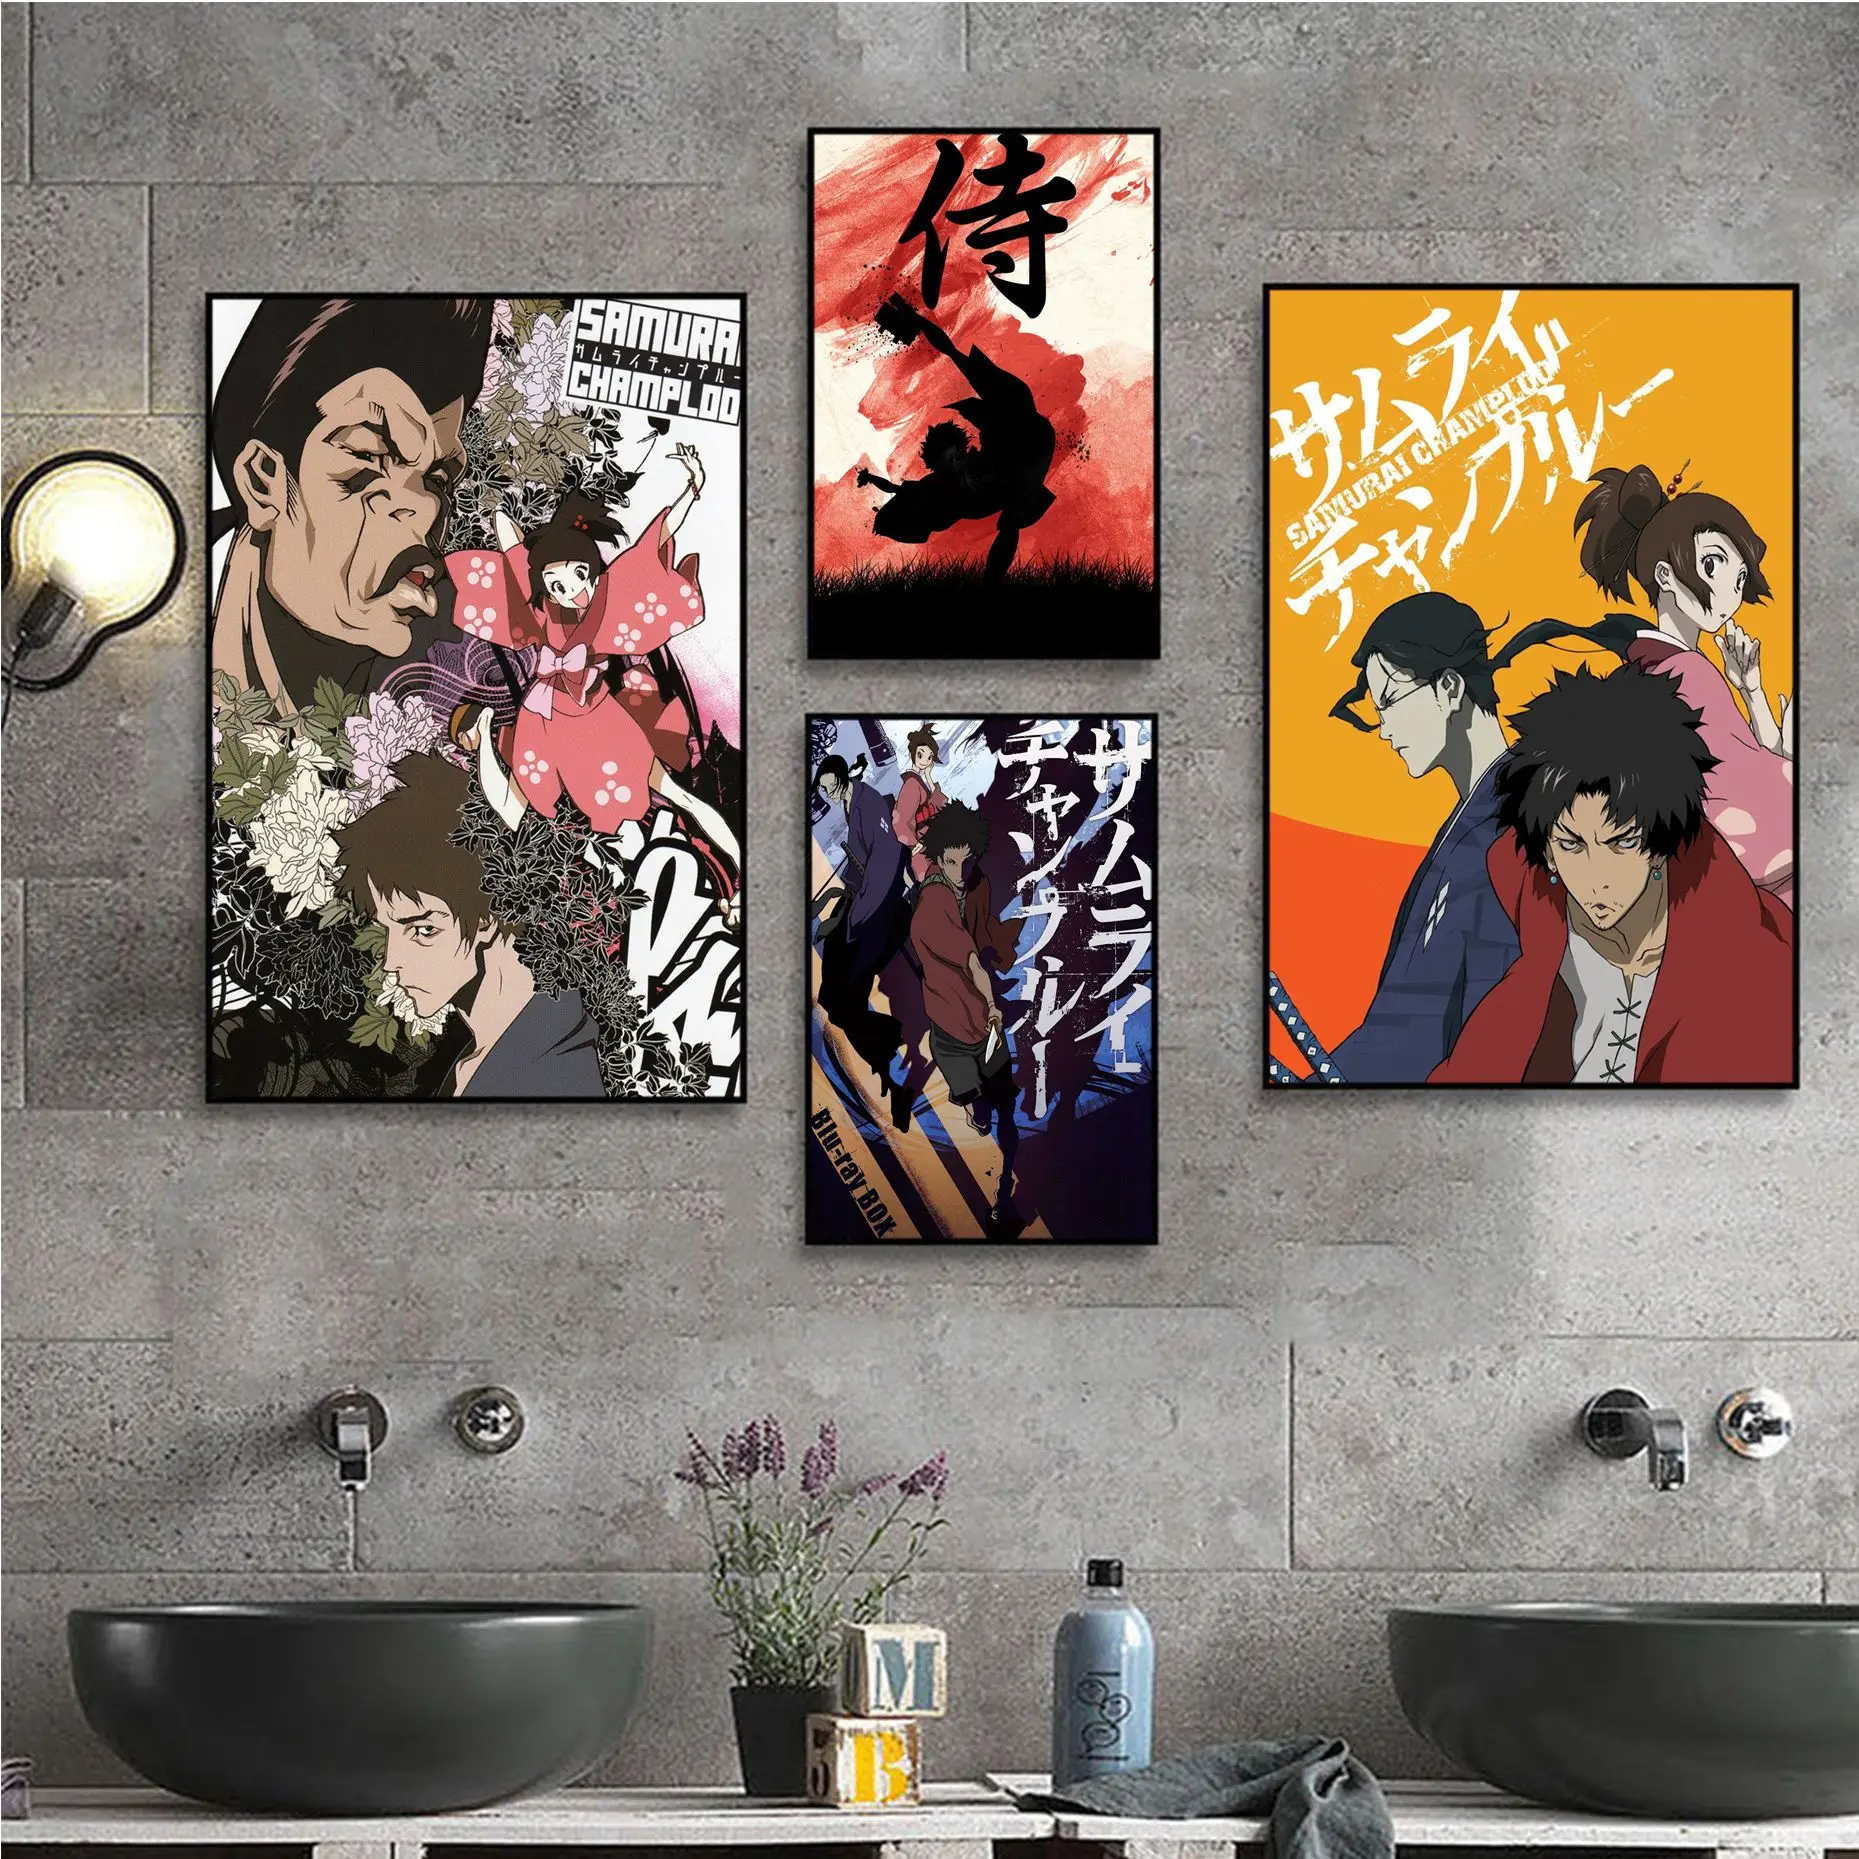 

Samurai Champloo Anime Posters Sticky Vintage Room Bar Cafe Decor Stickers Wall Painting